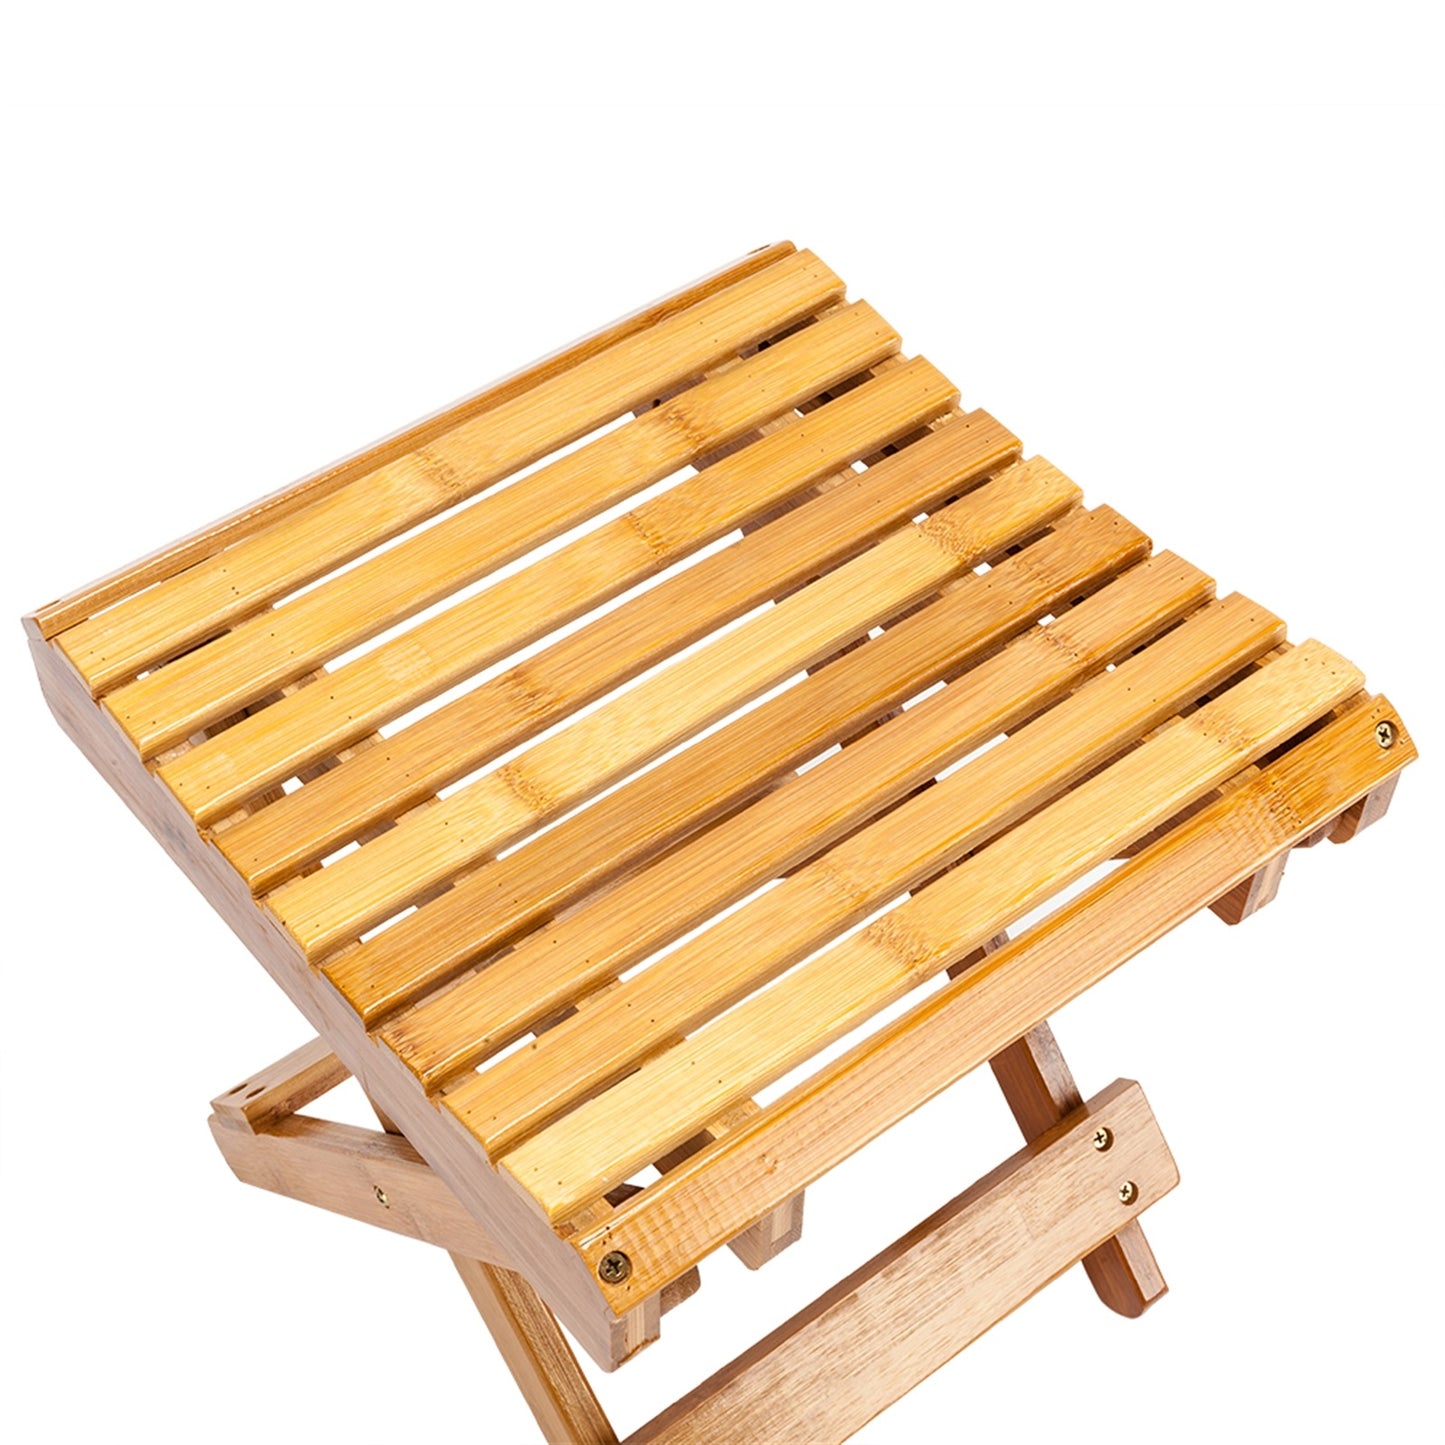 Bamboo Foot Rest & Fully Assembled Spa Chair - Natural Banboo